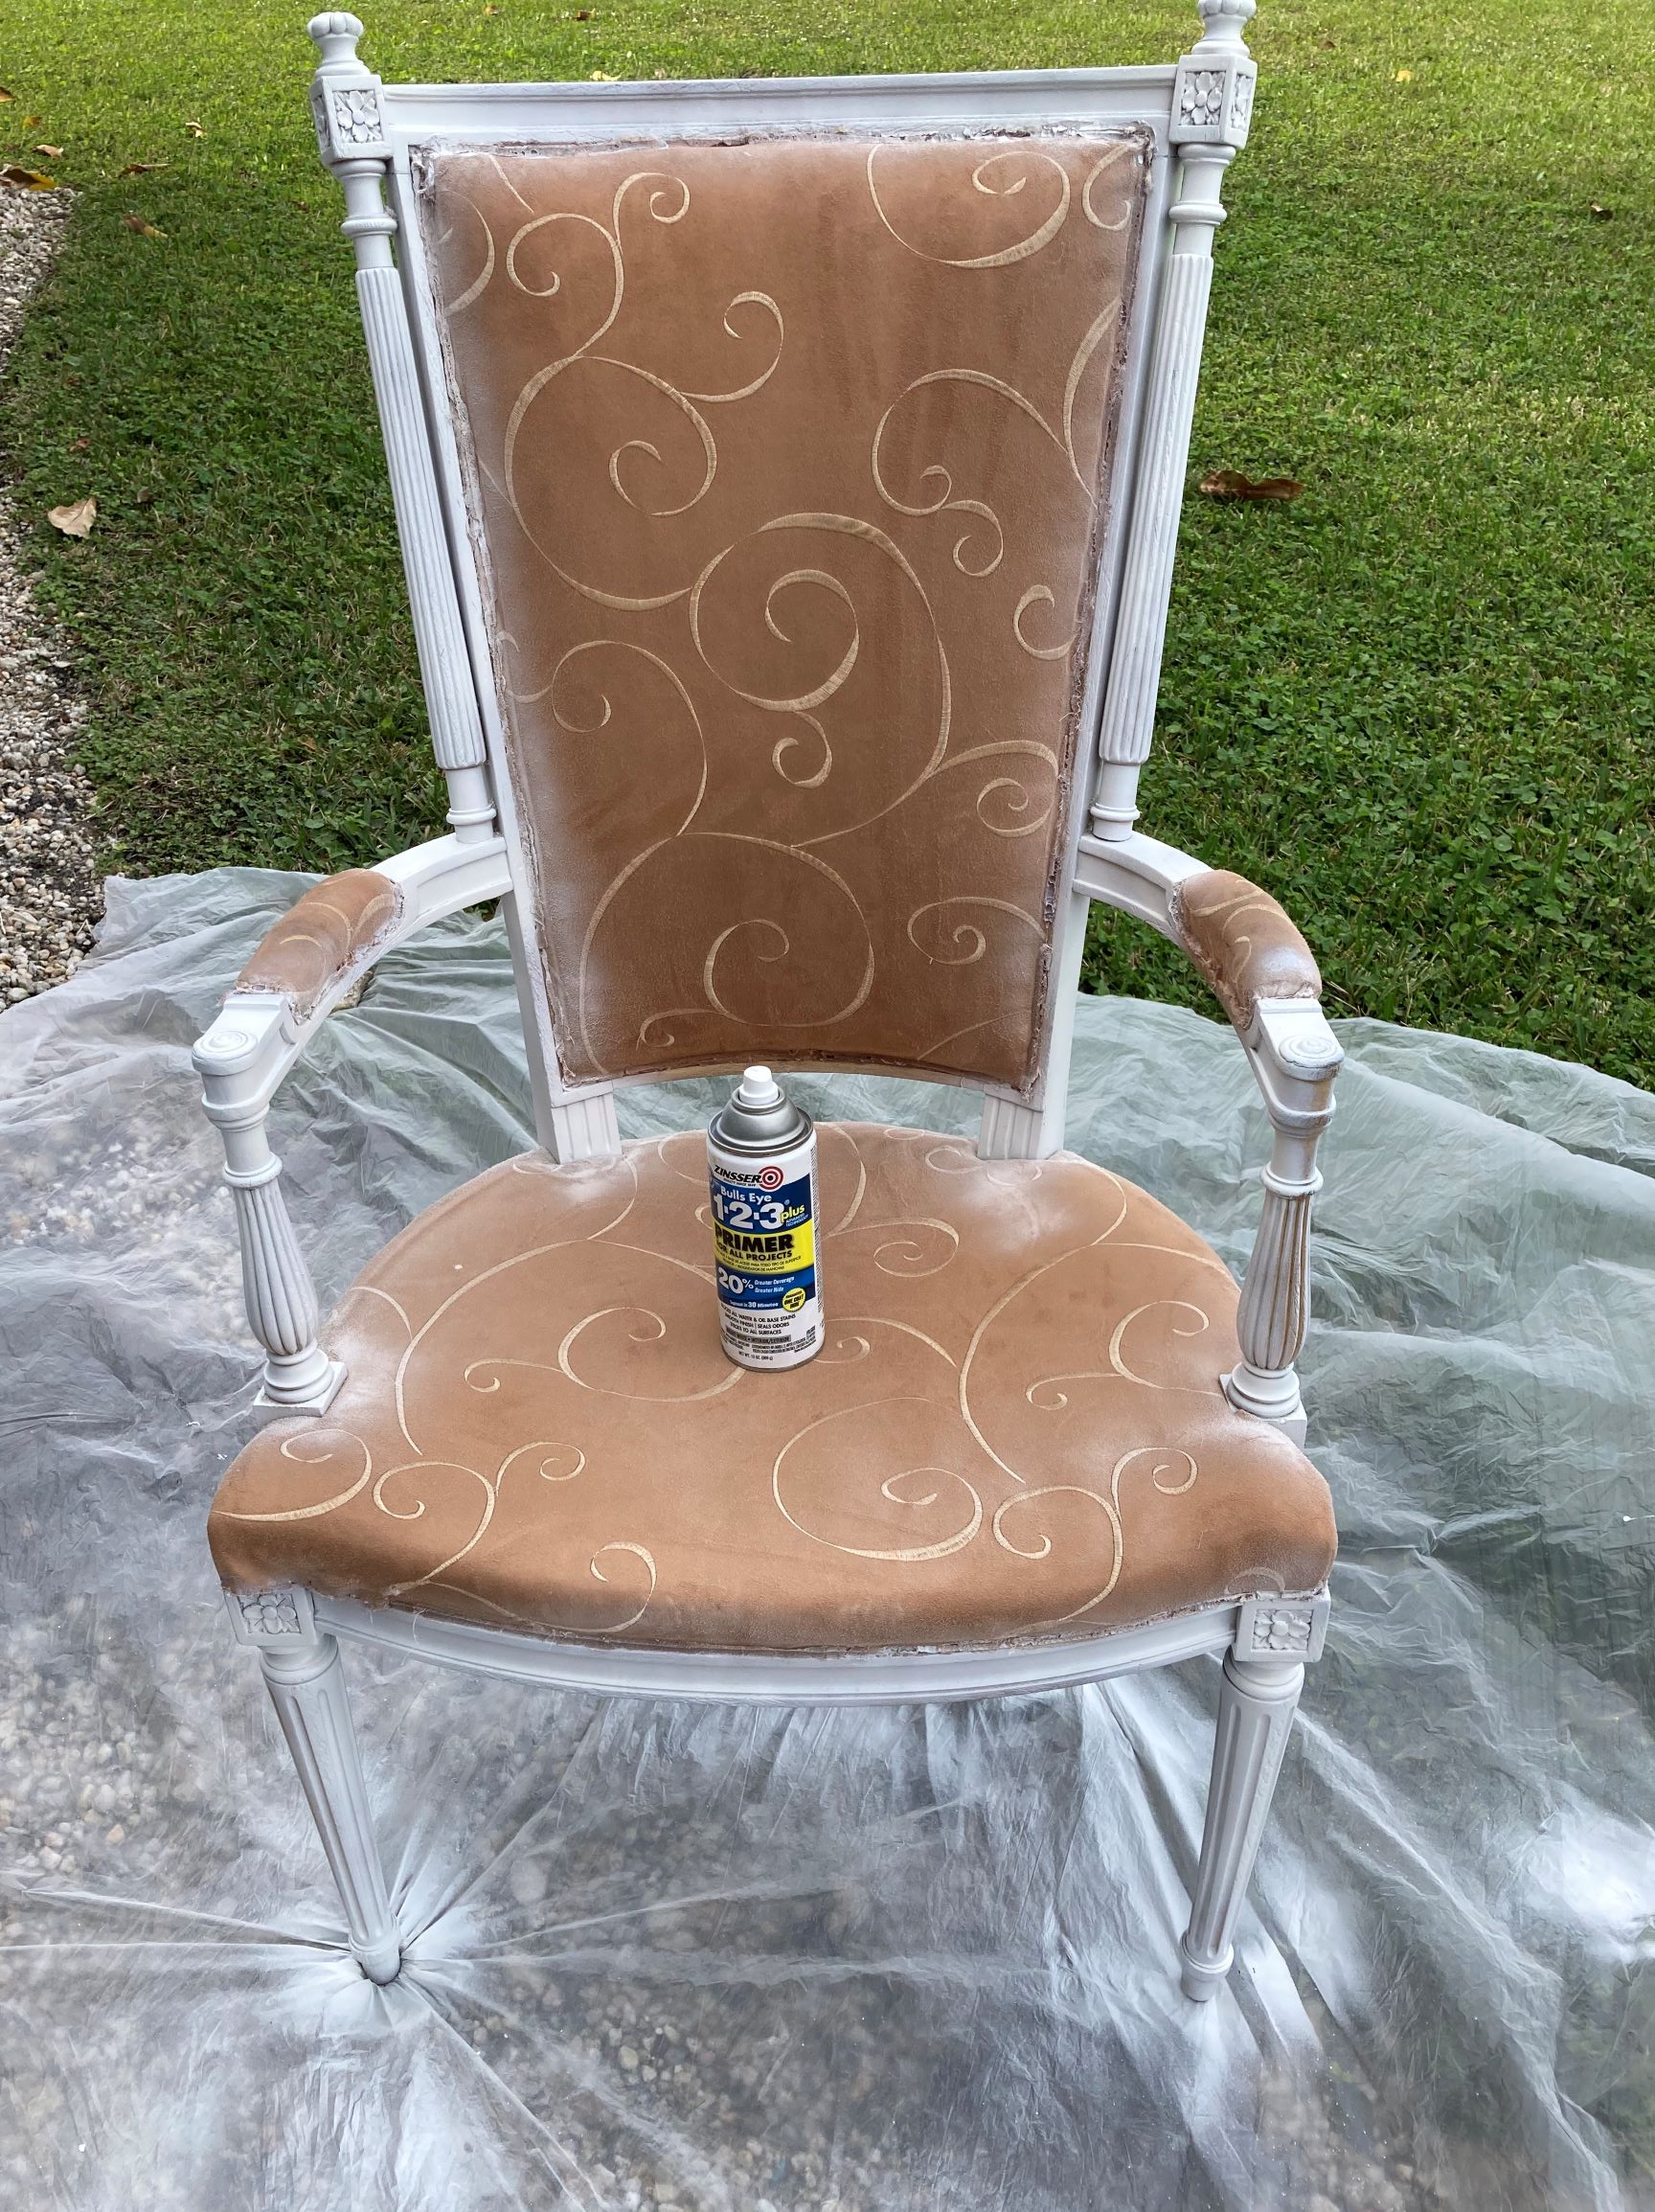 How to repurpose a chair with fur_ArtzyFartzyCreations.com